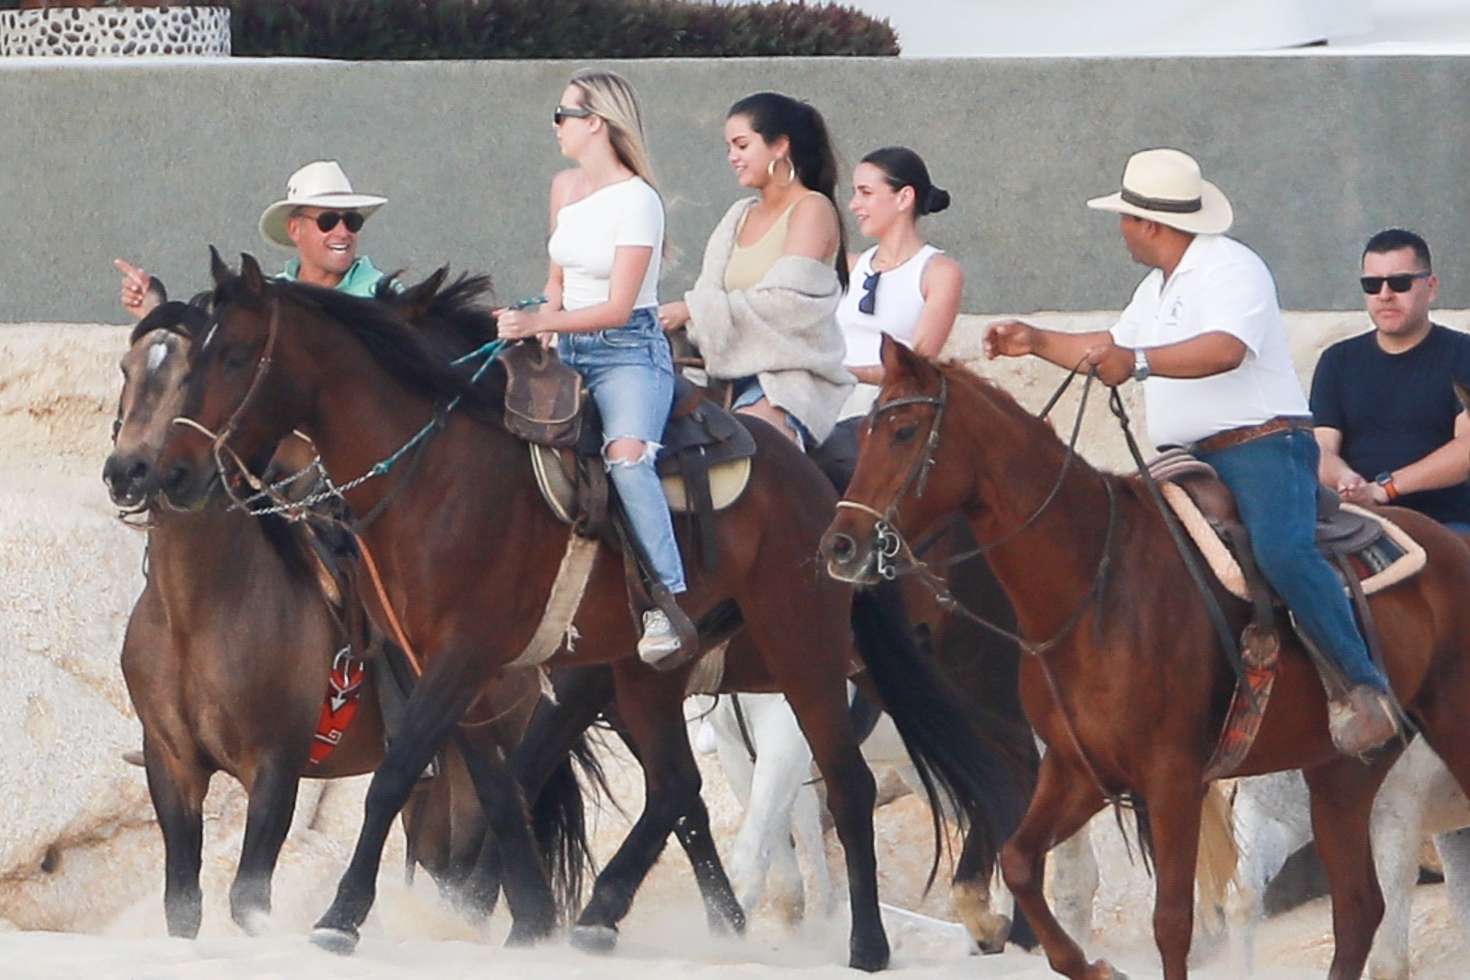 Selena Gomez â€“ Riding a horse with friends in Cabo San Lucas